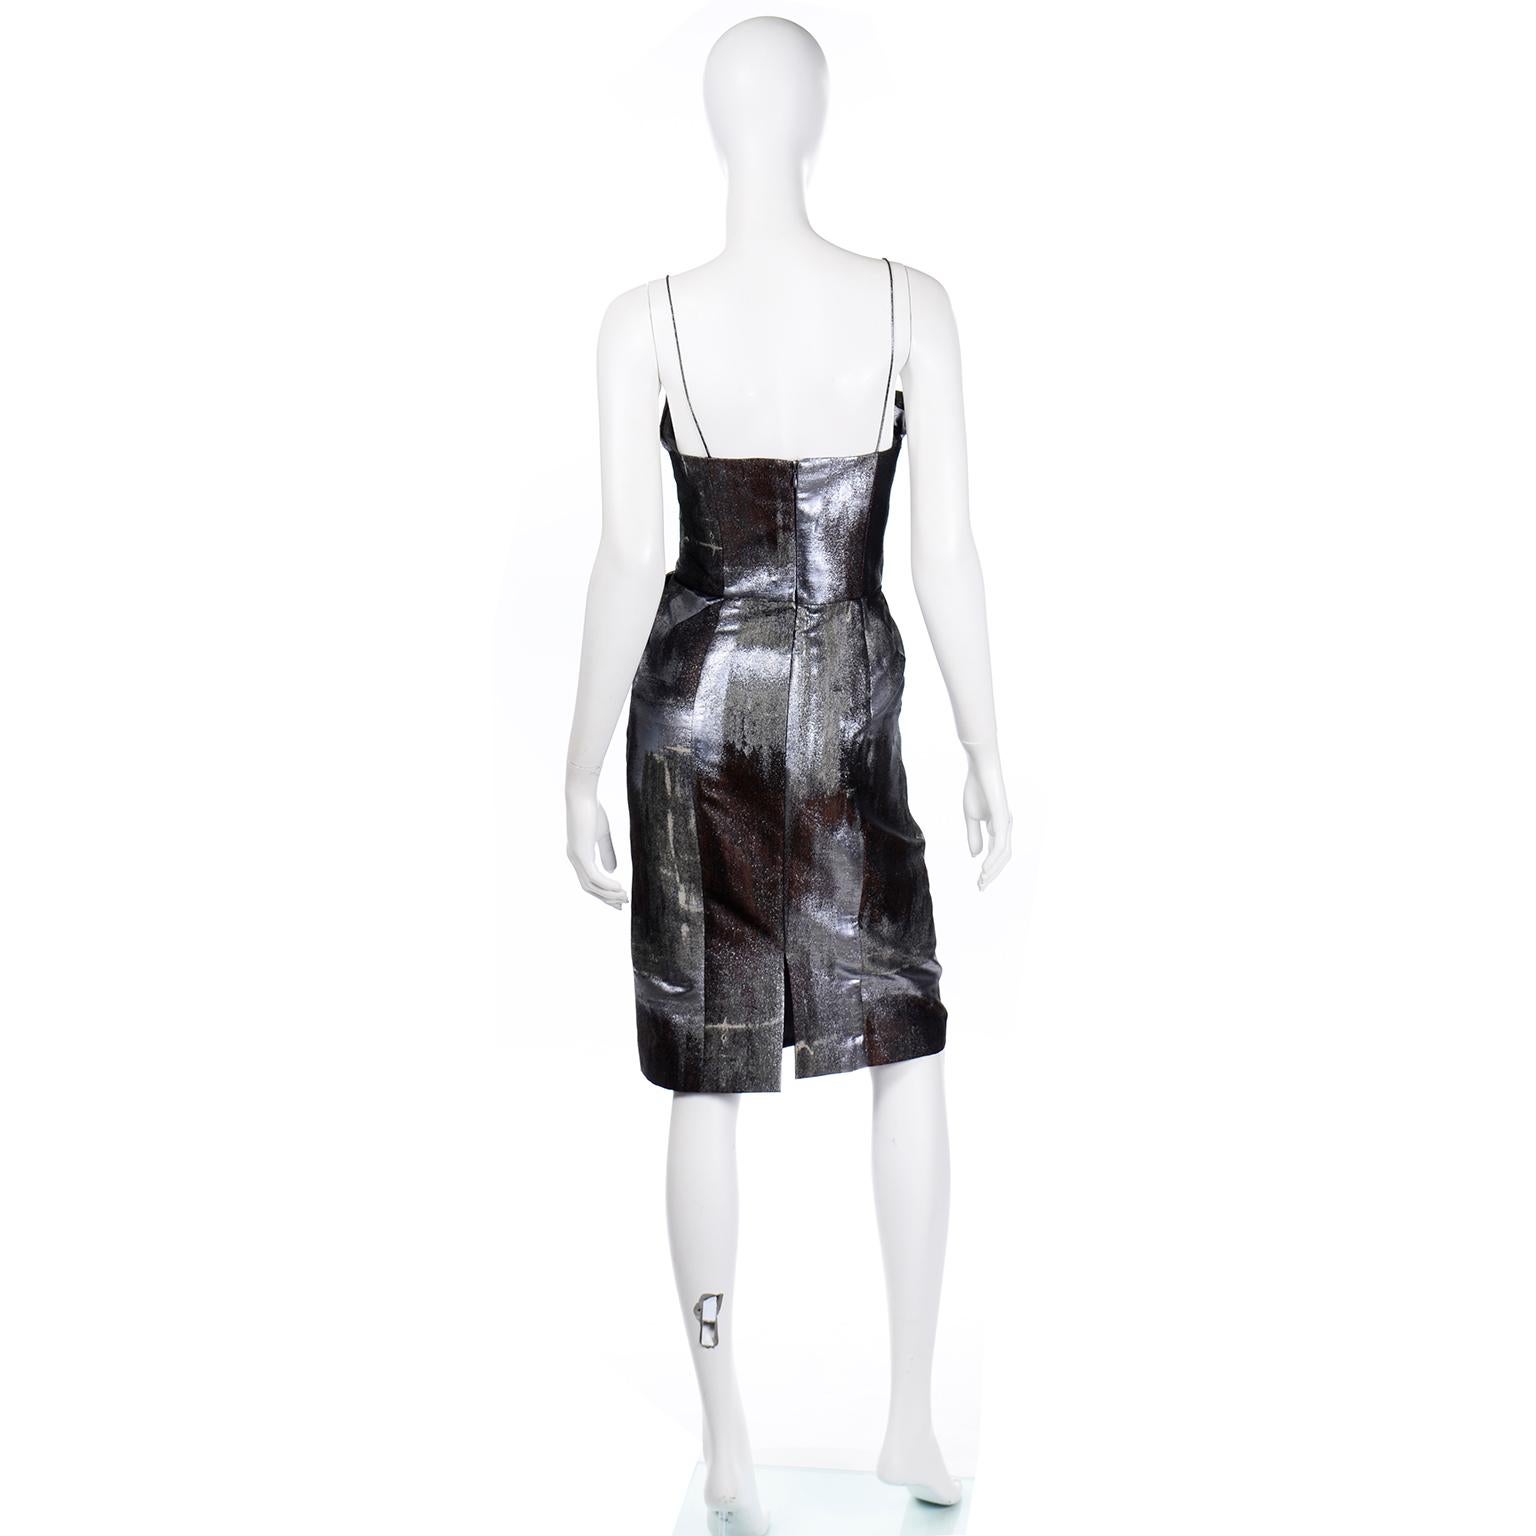 Deadstock Bill Blass Fall 2008 Platinum Jacquard Evening Bustier Dress w Tag In Excellent Condition For Sale In Portland, OR